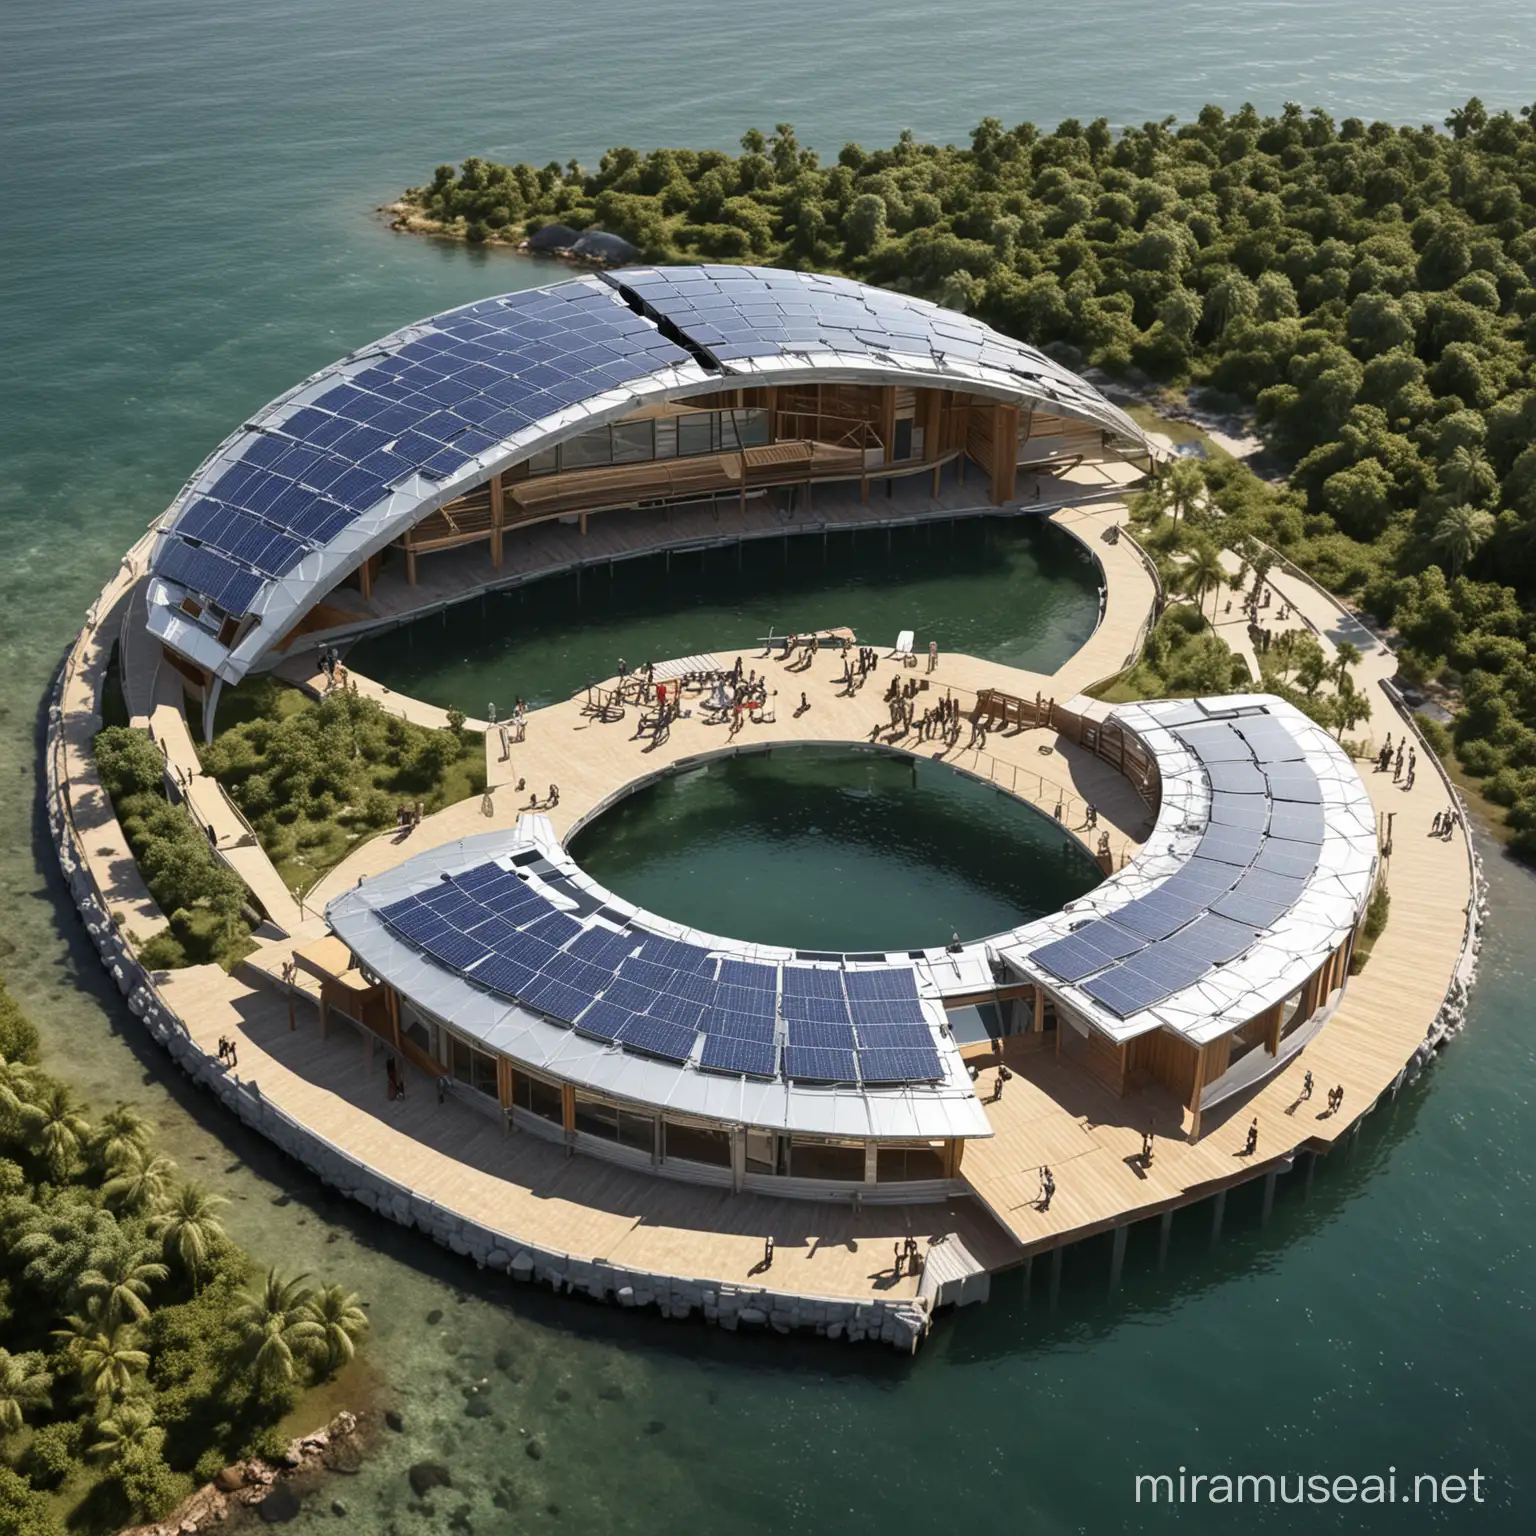 Sustainable TripleStory MICE Structure with Solar Panels and Water Surroundings